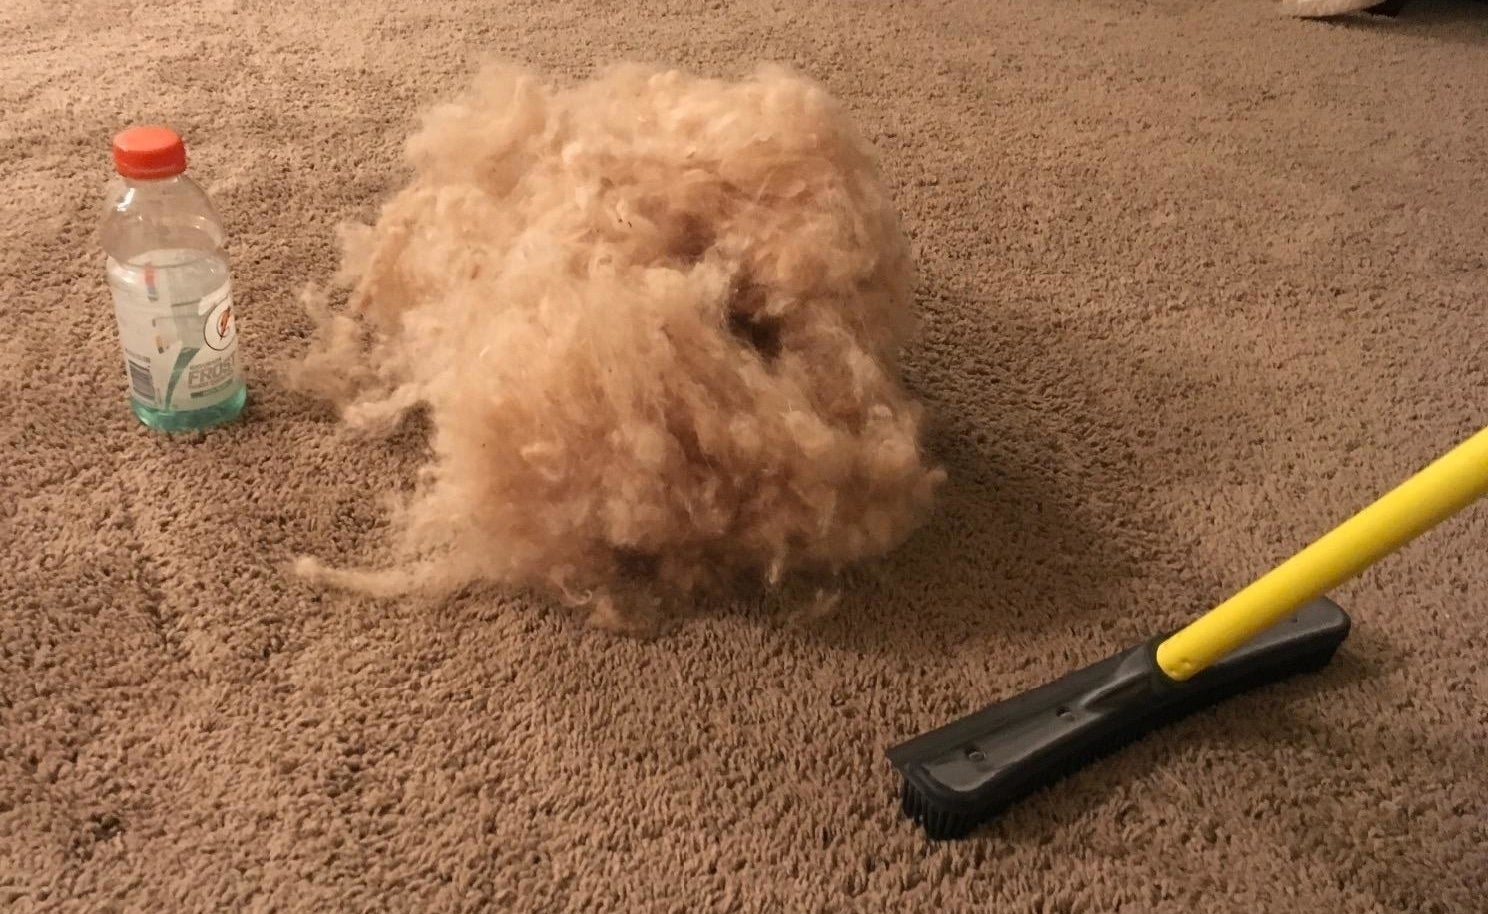 The broom sweeping up a huge pile of dog fur from the carpet 